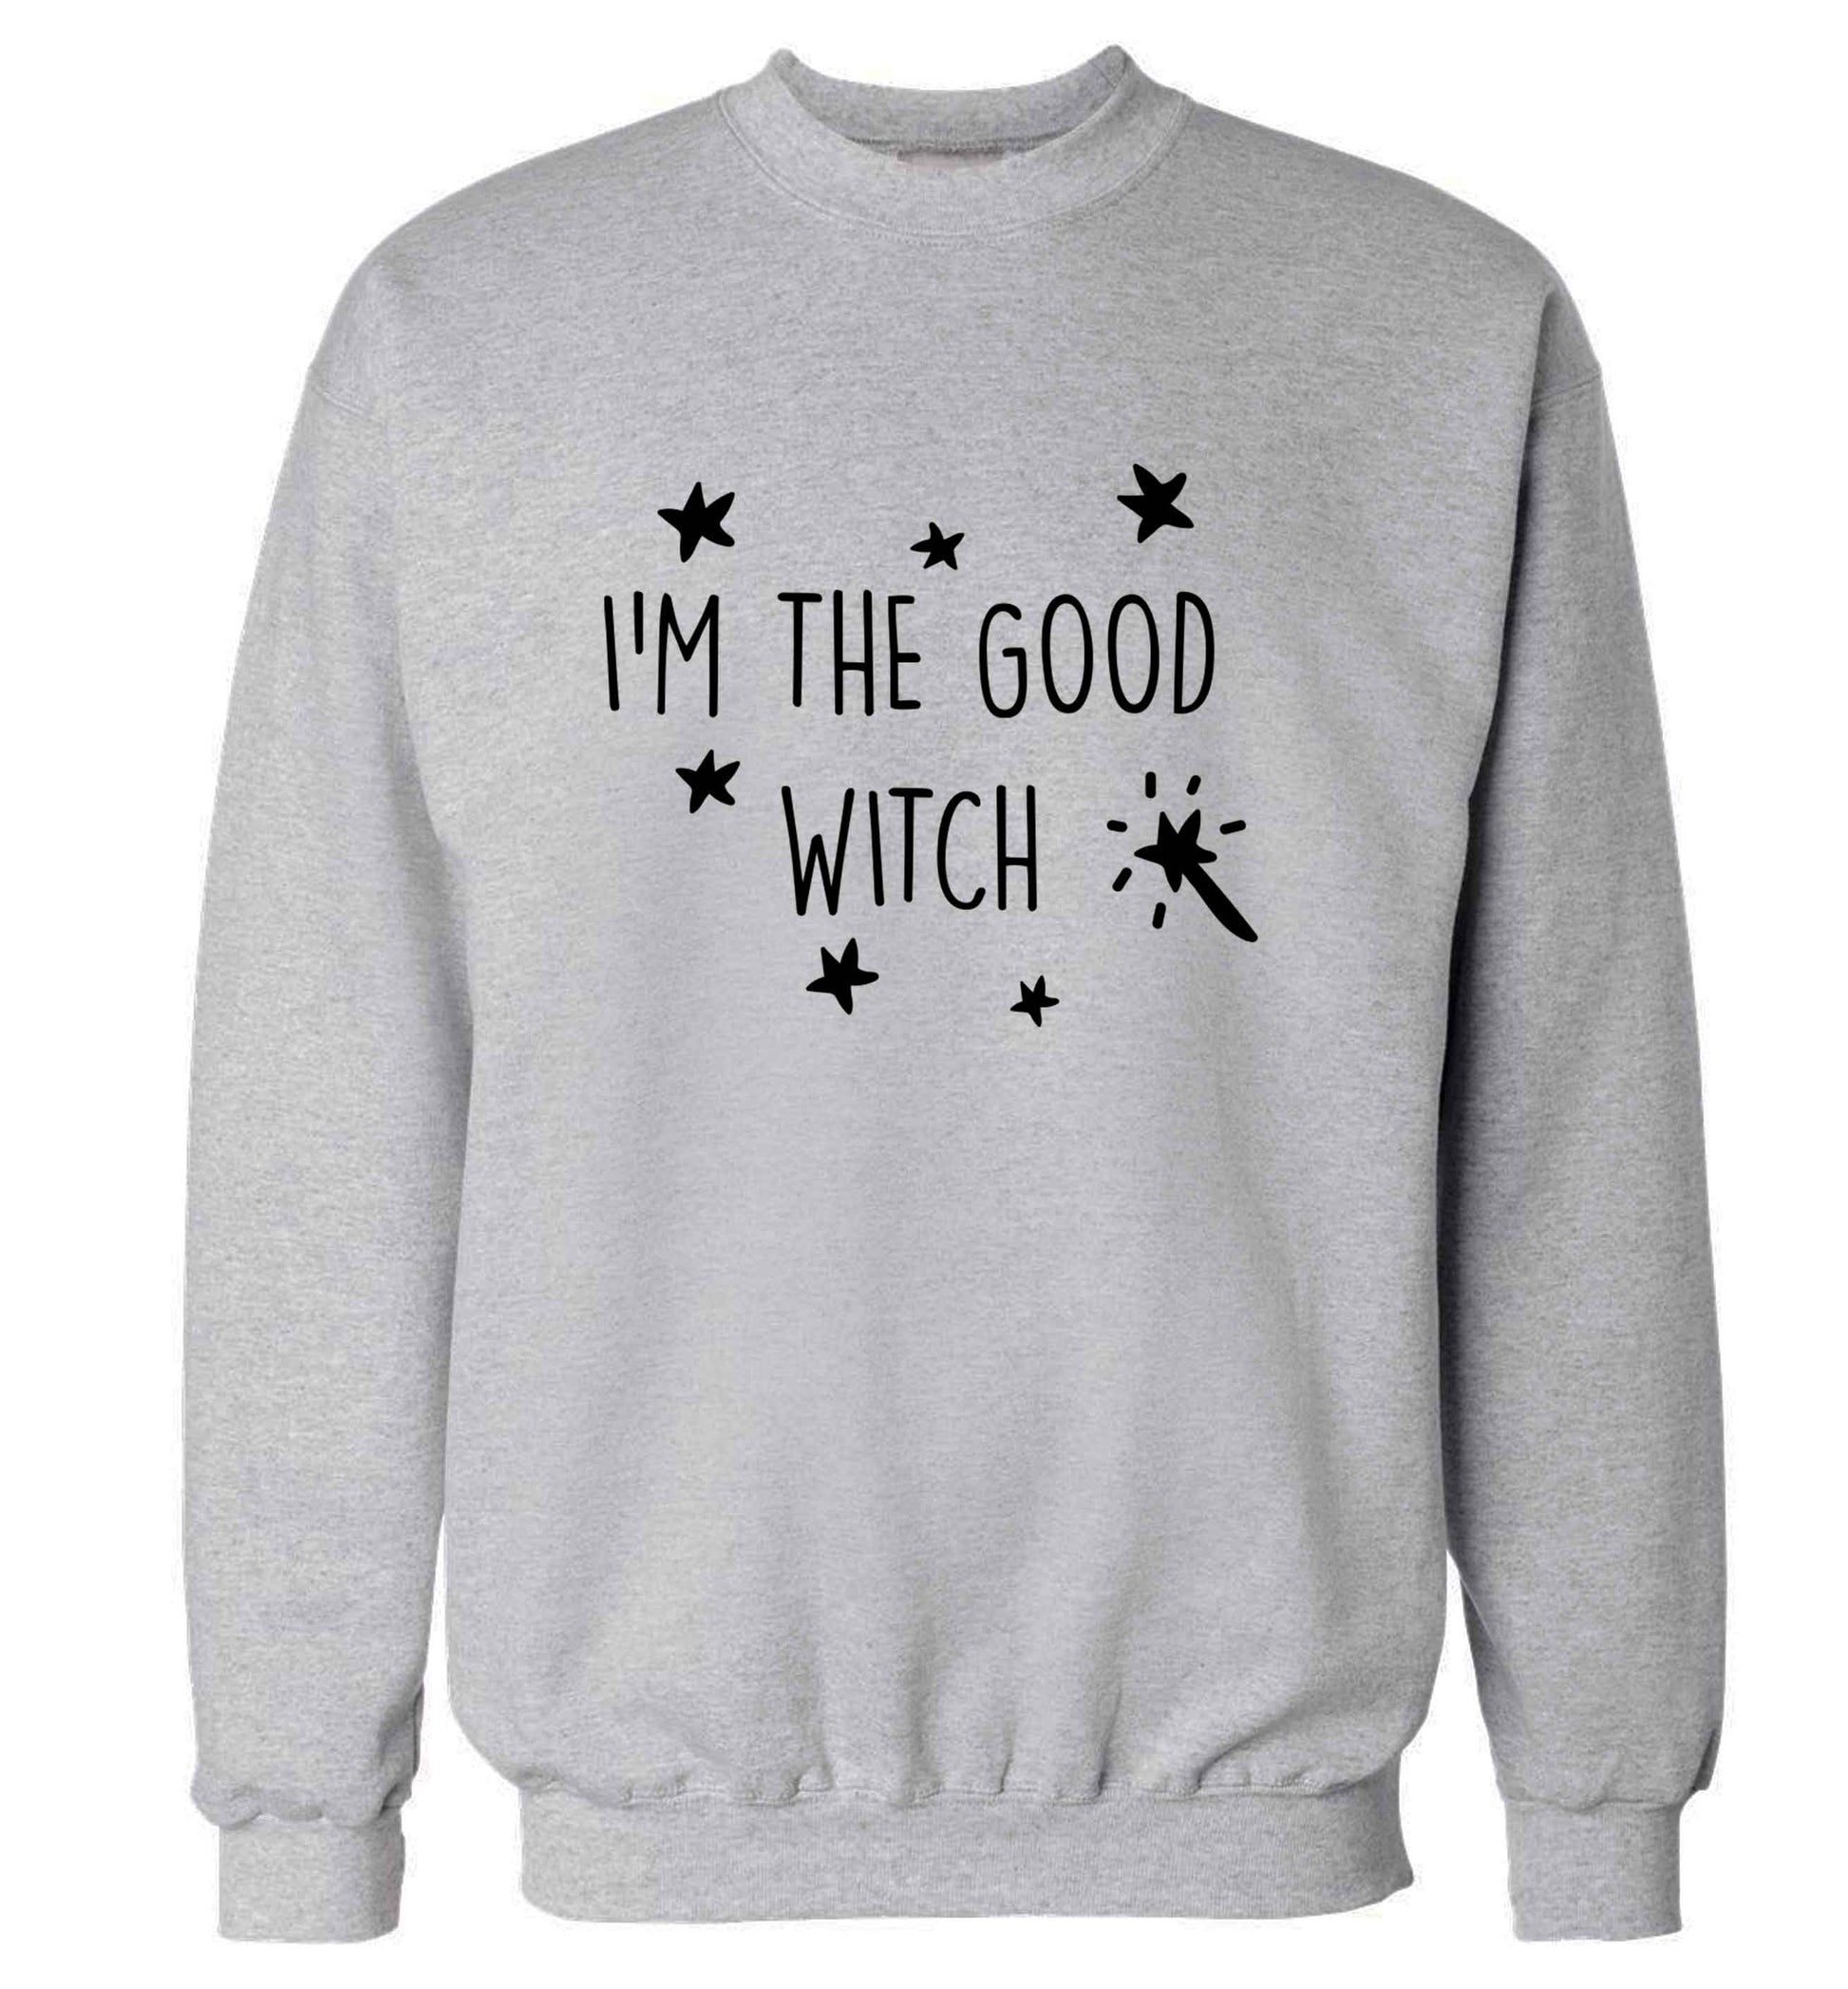 Good witch adult's unisex grey sweater 2XL